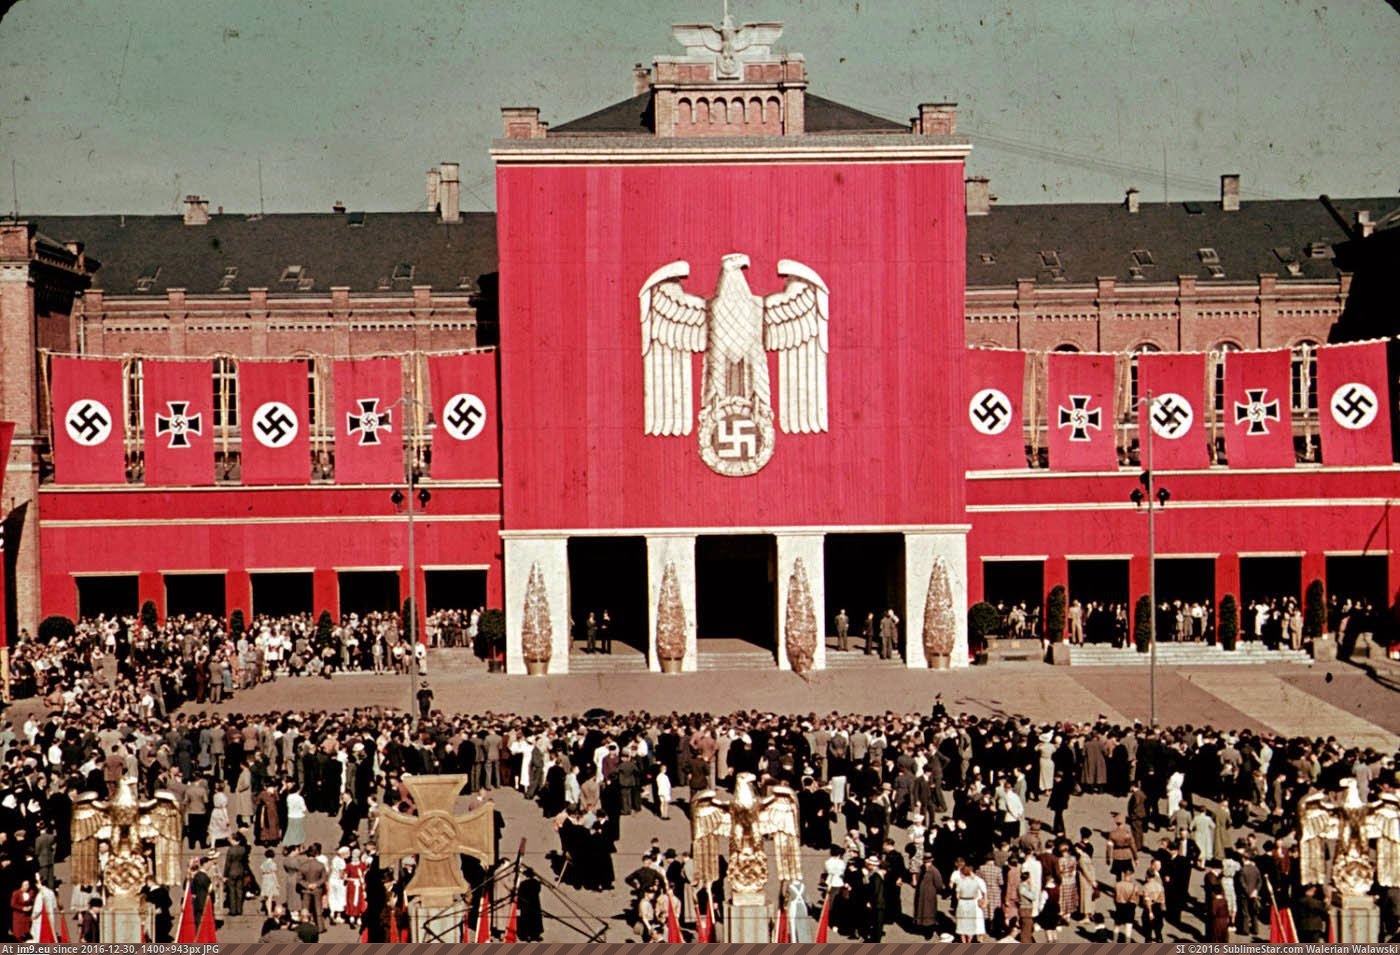 Reich Veterans Day, 1939 (in Restored Photos of Nazi Germany)